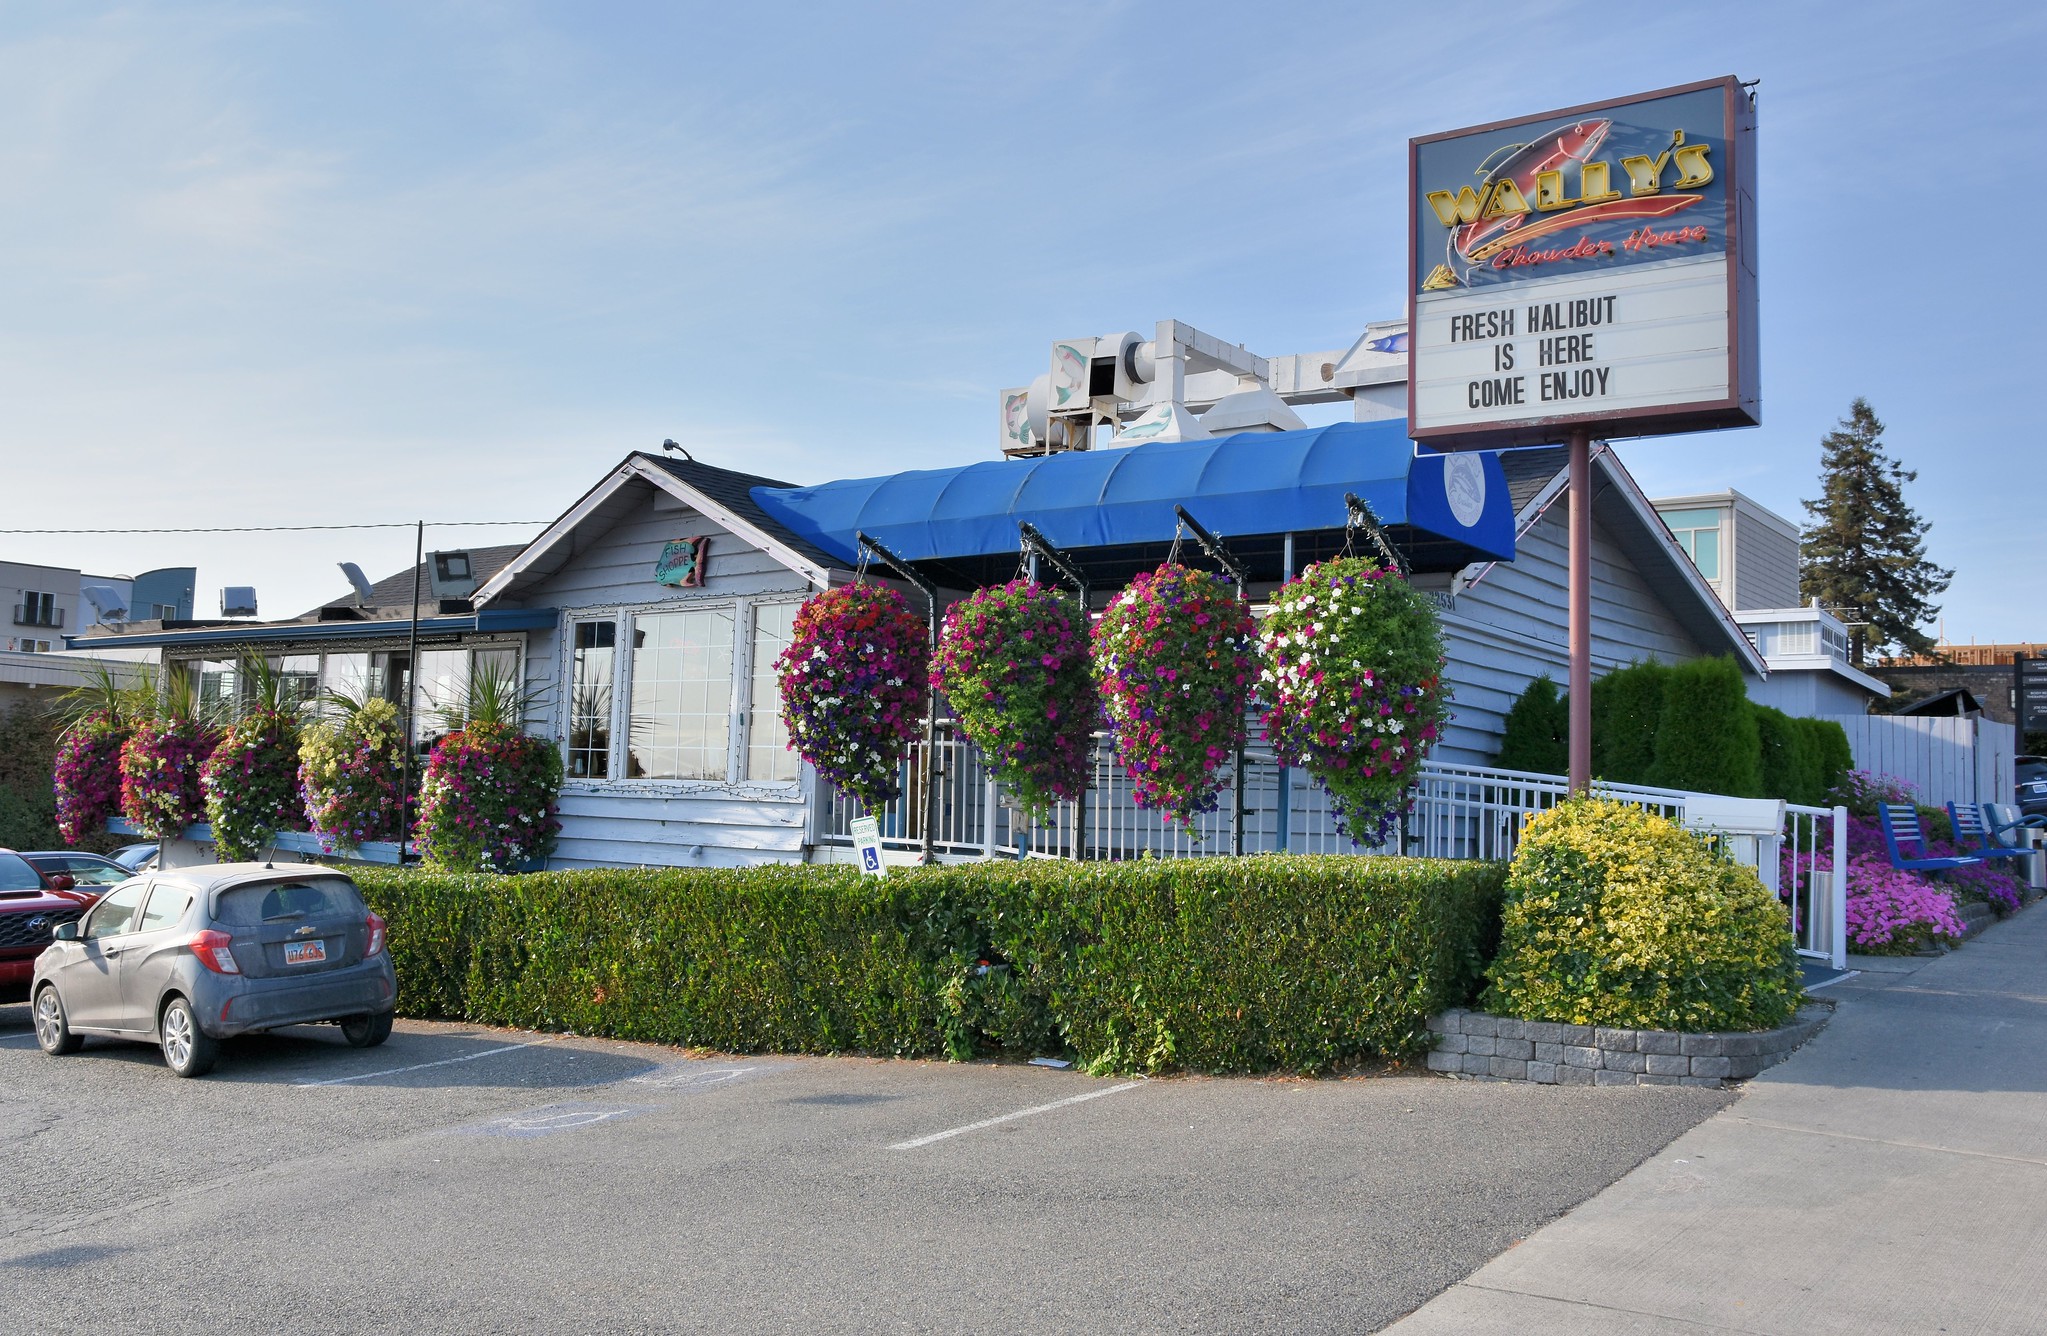 Wally's Chowder House serves fresh Haddock and Cod in season, and delicious fresh seafood chowder.